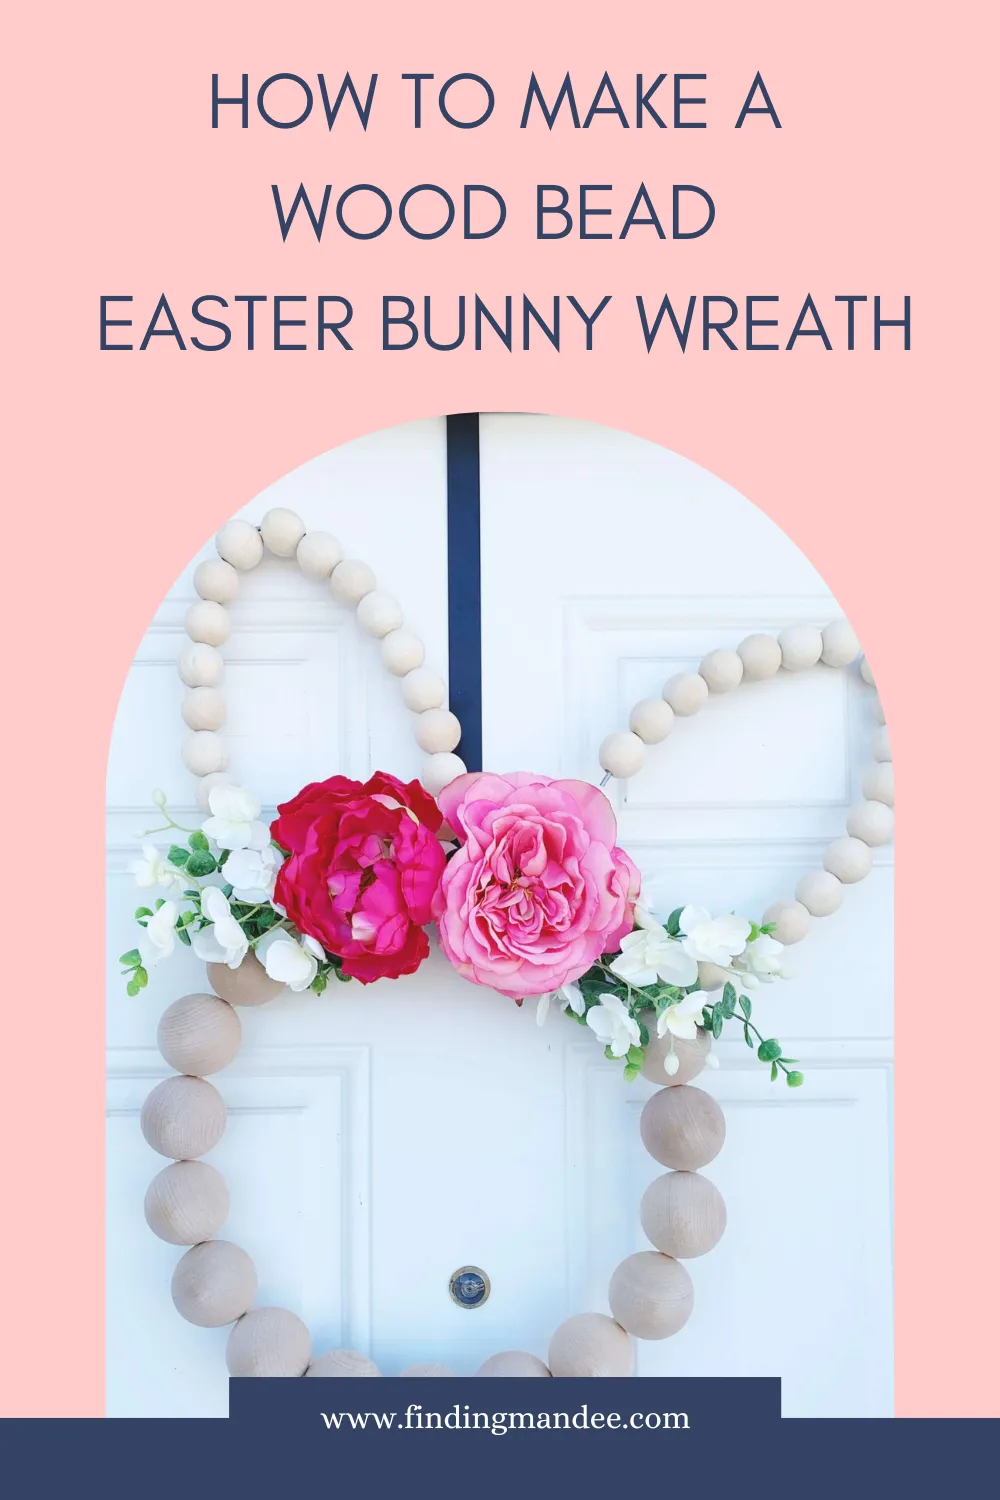 How to Make a Wood Bead Easter Bunny Wreath | Finding Mandee